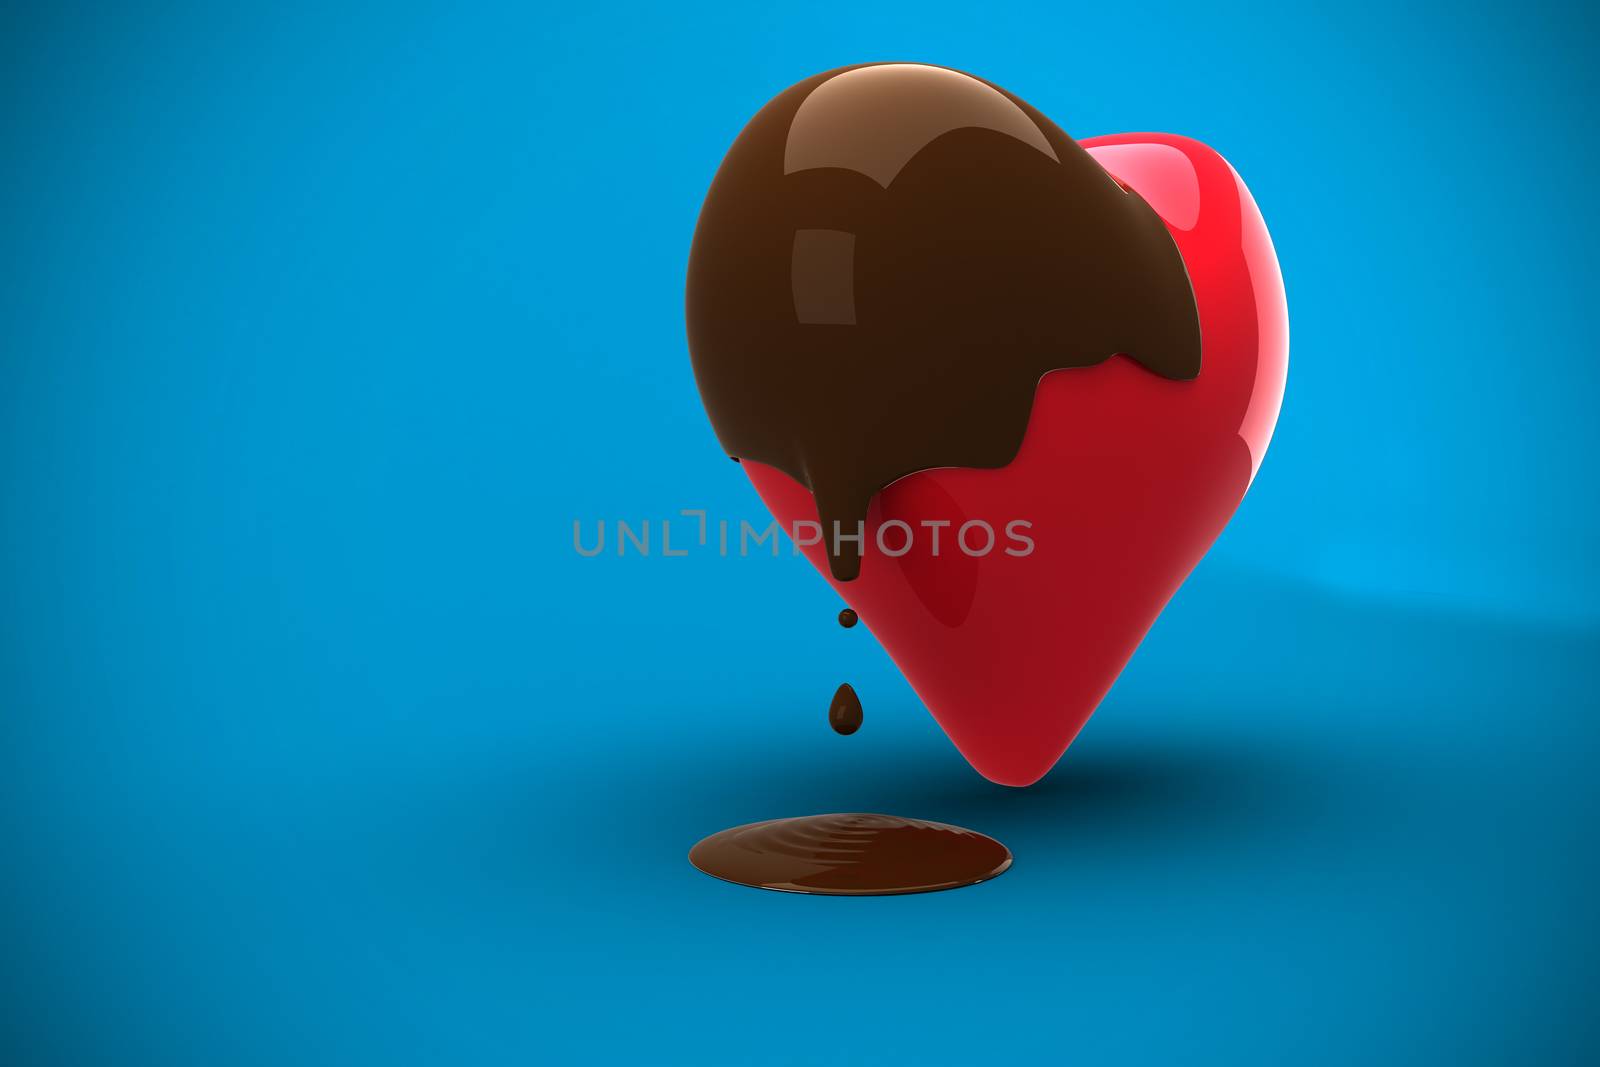 Heart dipped in chocolate against blue background with vignette